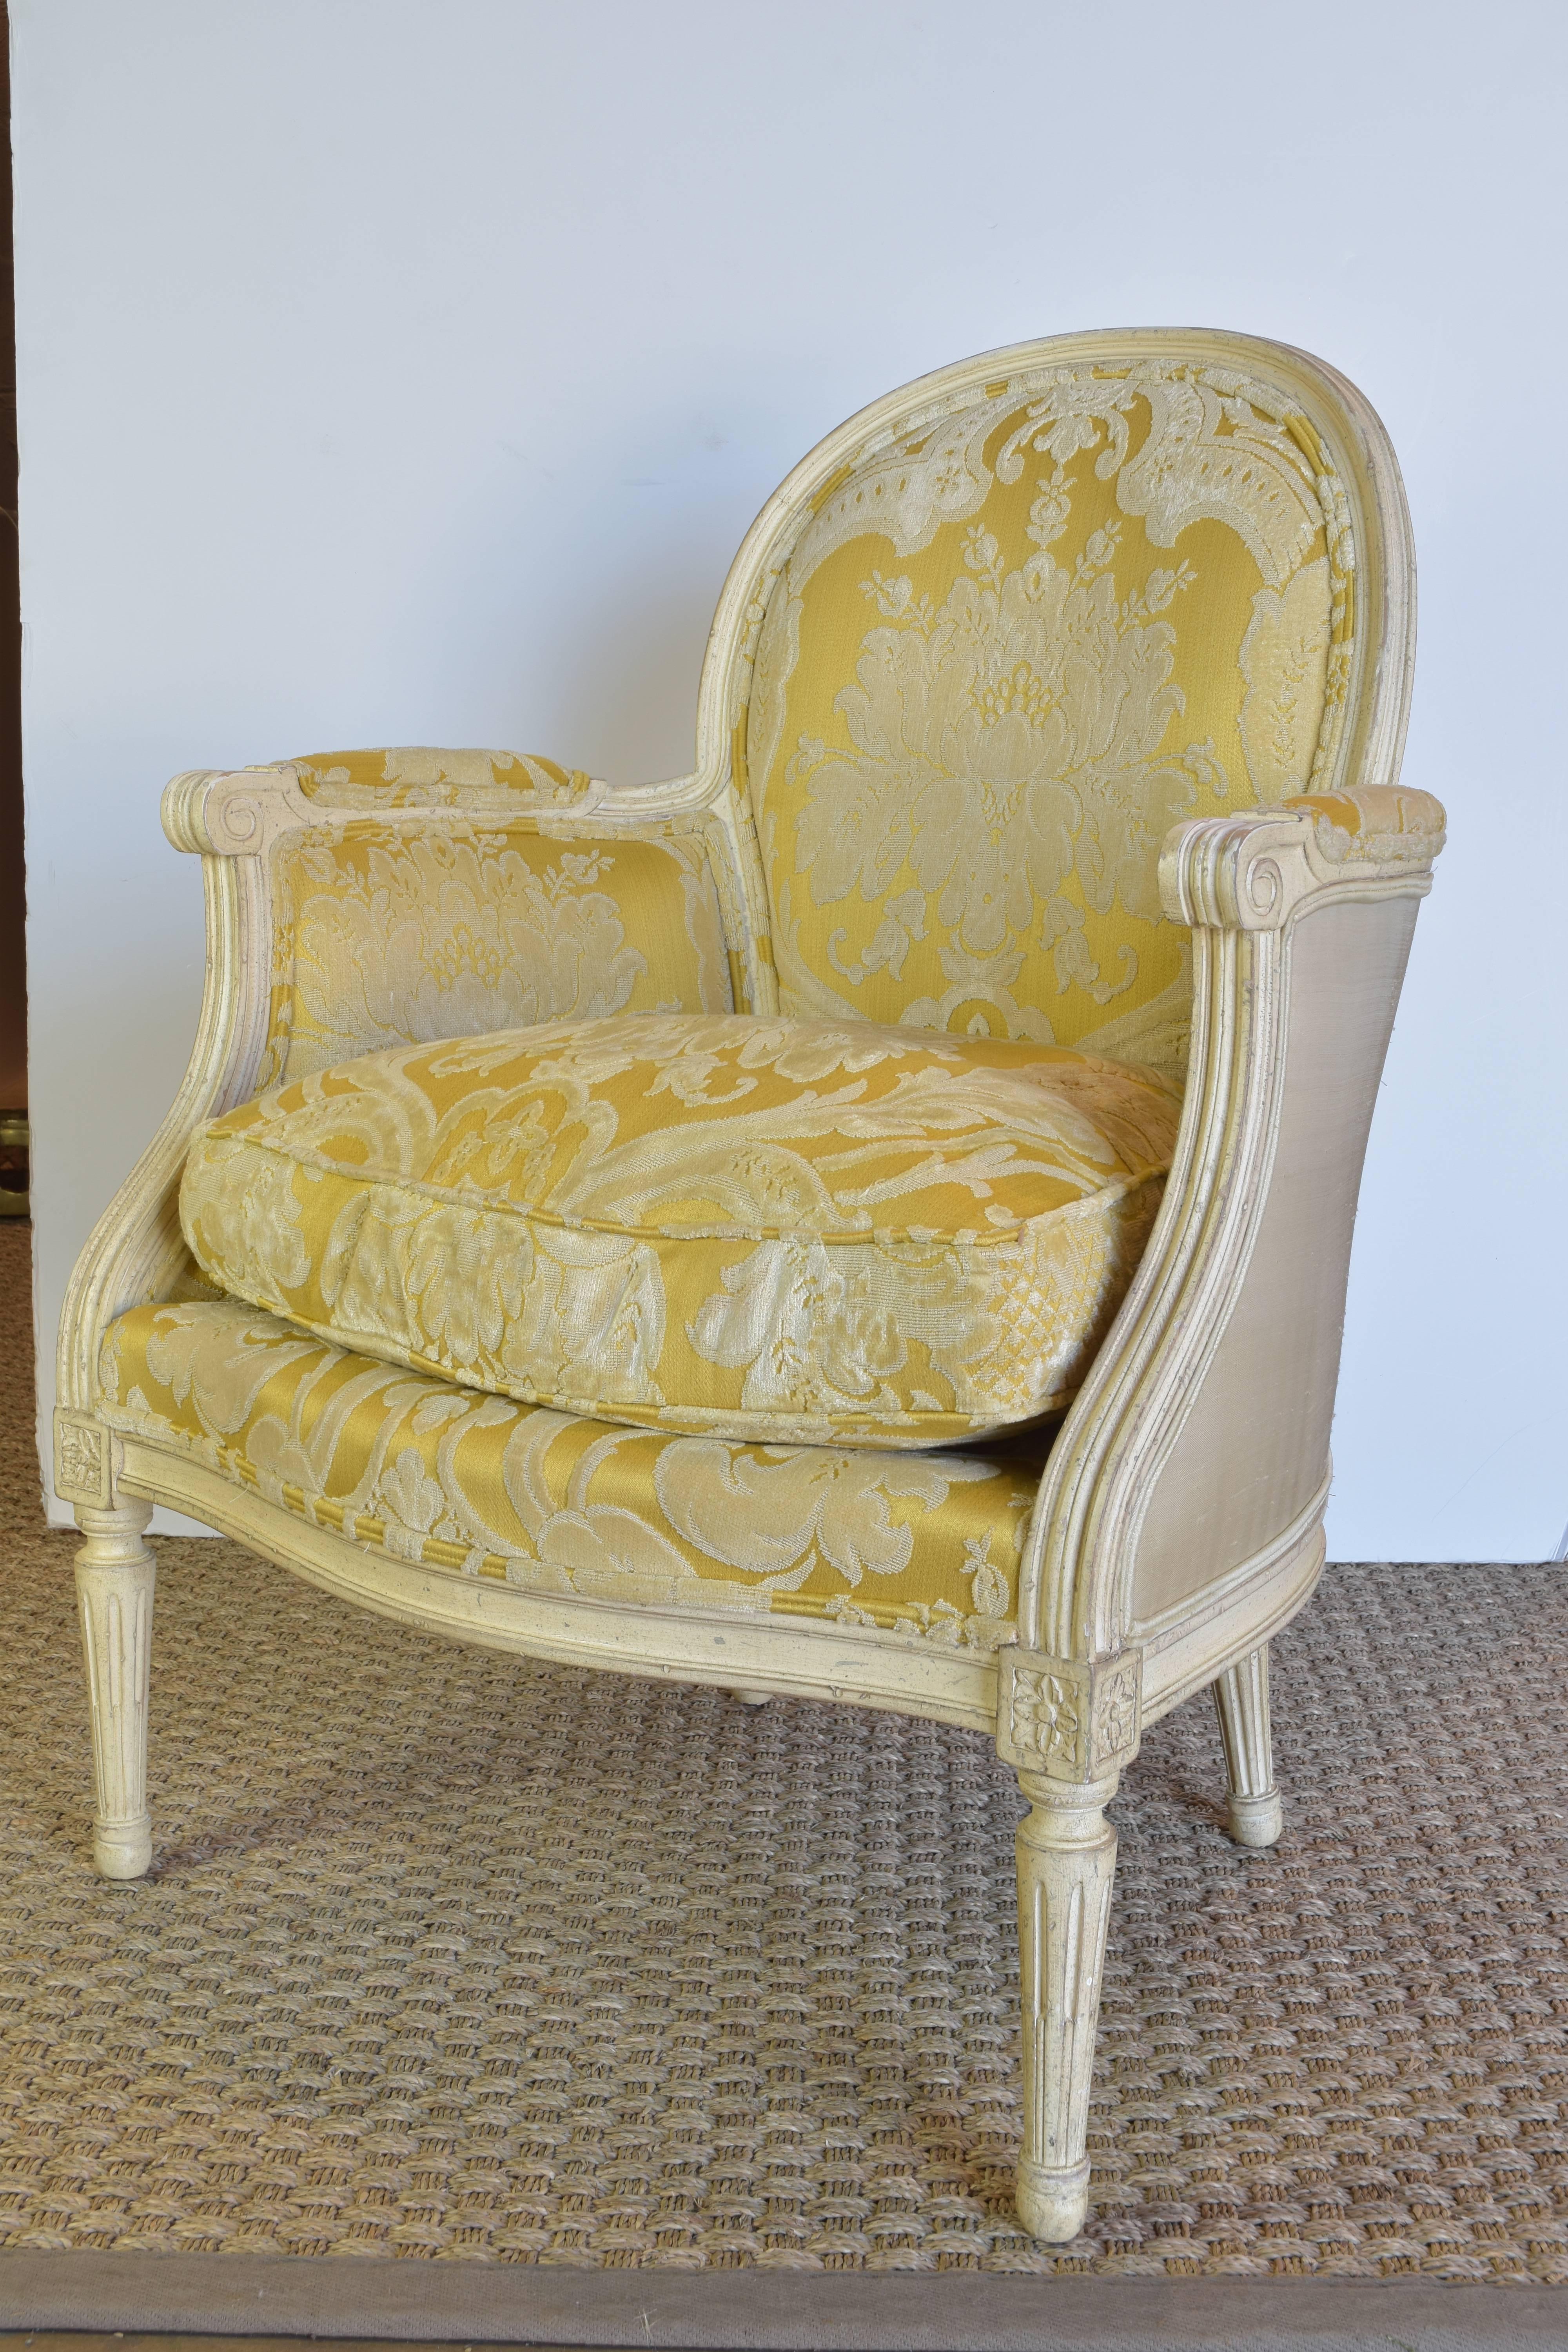 Upholstery Baker Chair in the Style of Louis XVI, 20th Century